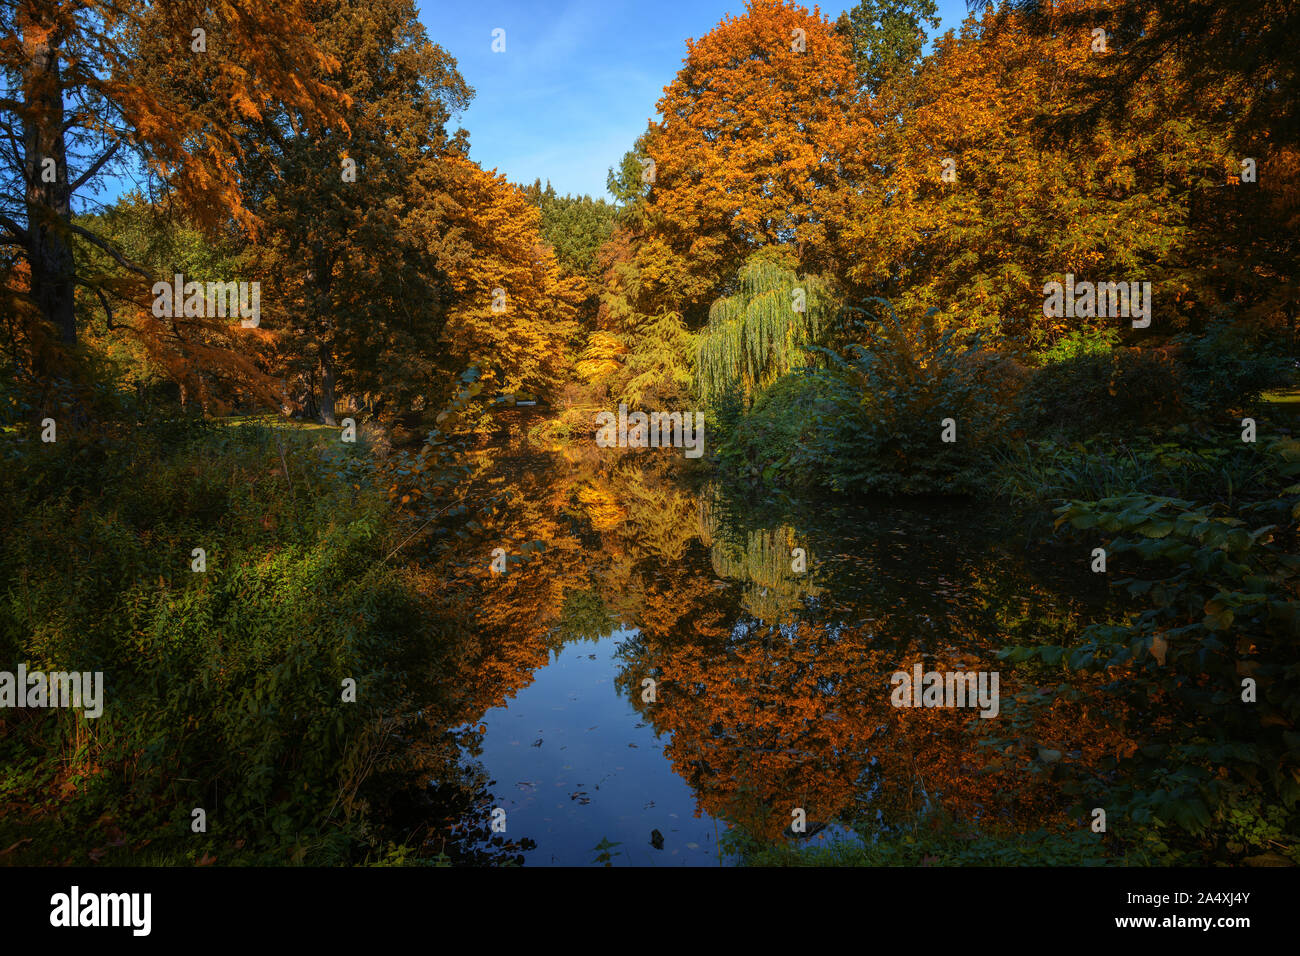 Beautiful autumn forest with colorful foliage around a lake with reflection, seasonal nature landscaape, selected focus Stock Photo